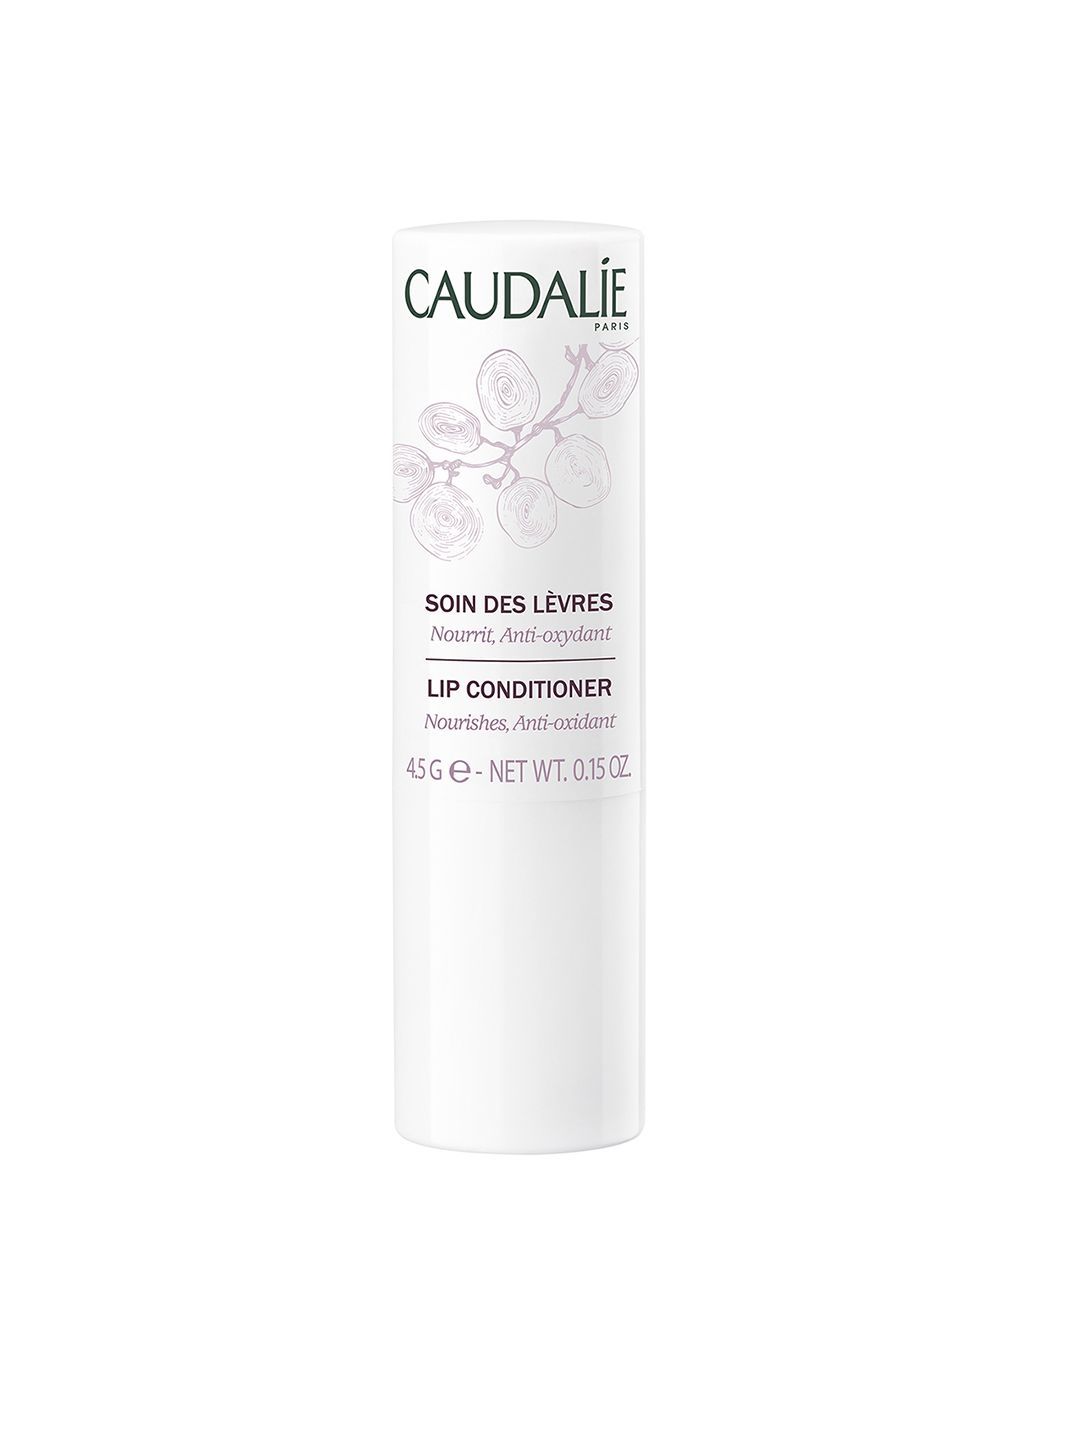 Caudalie Anti-Oxidant Lip Conditioner with Grape Seed Oil - 4.5 g Price in India